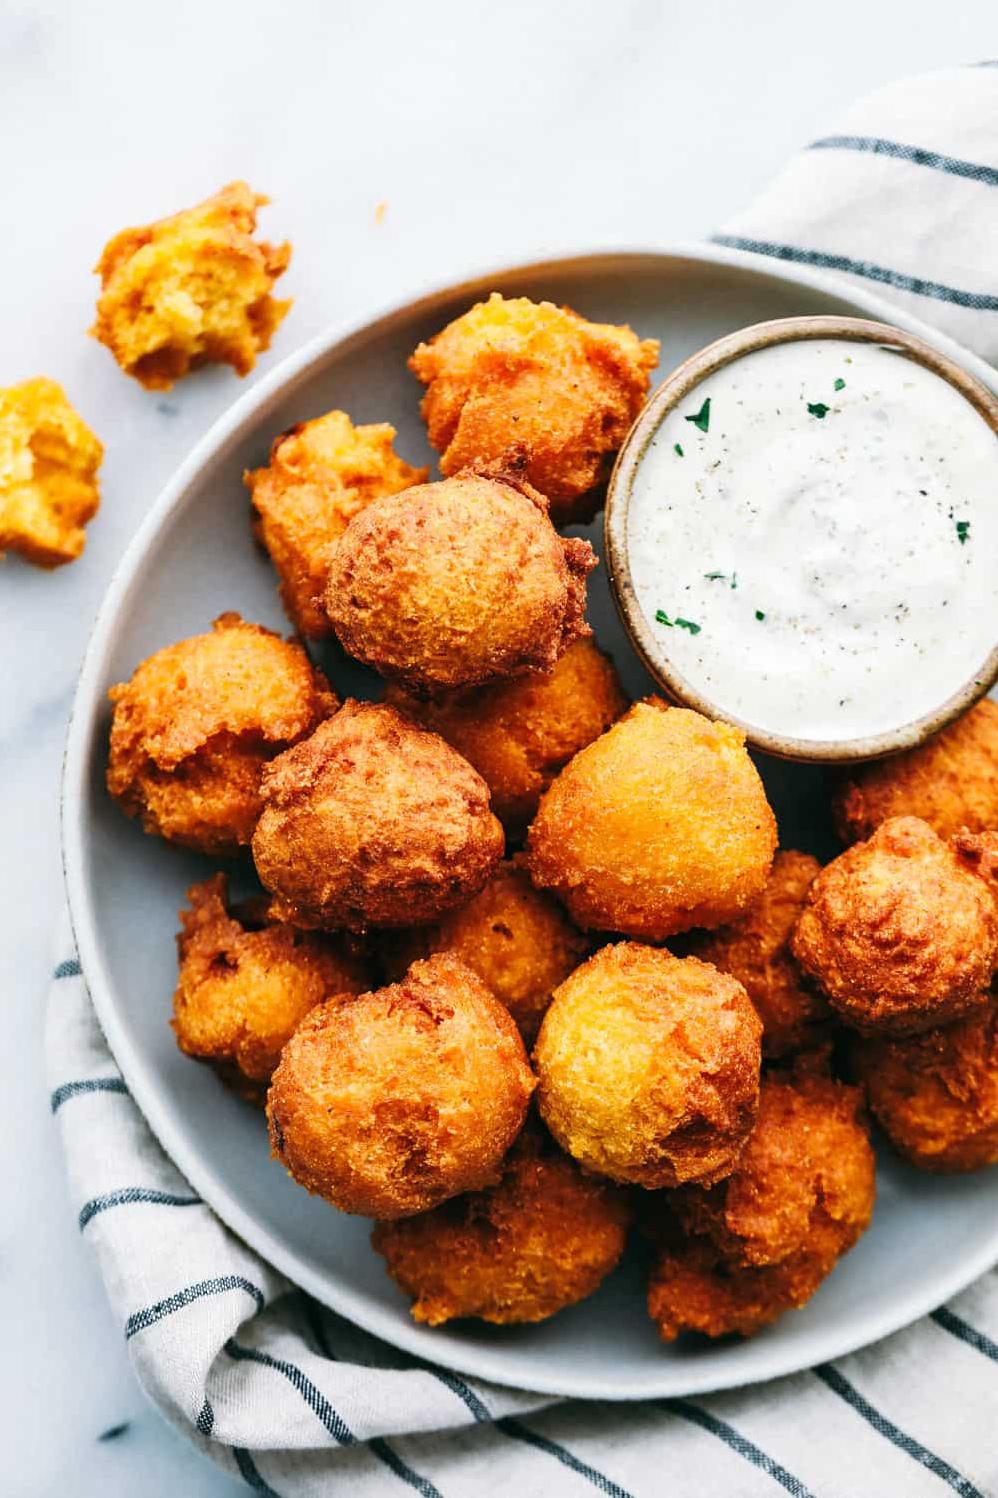  Say hello to your new favorite comfort food: Frank's Southern Hush Puppies.